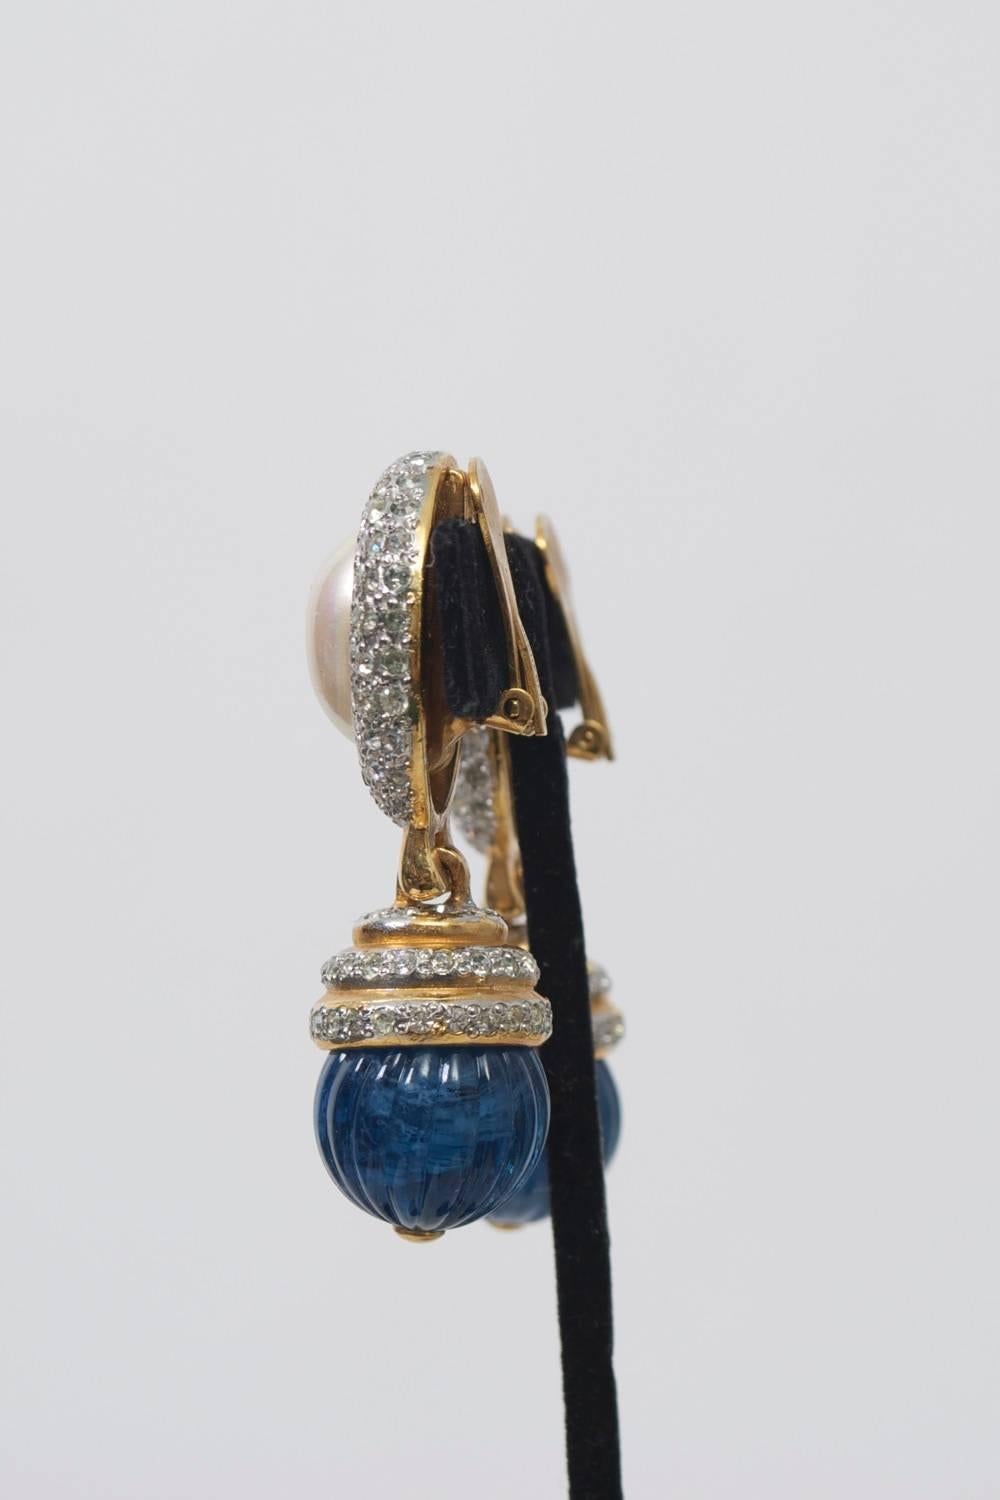 Vogue Bijoux drop earrings, the oval earpiece of a central mabe pearl framed by rhinestones suspending a ribbed, round blue stone topped by graduated rings of gold and rhinestone. 